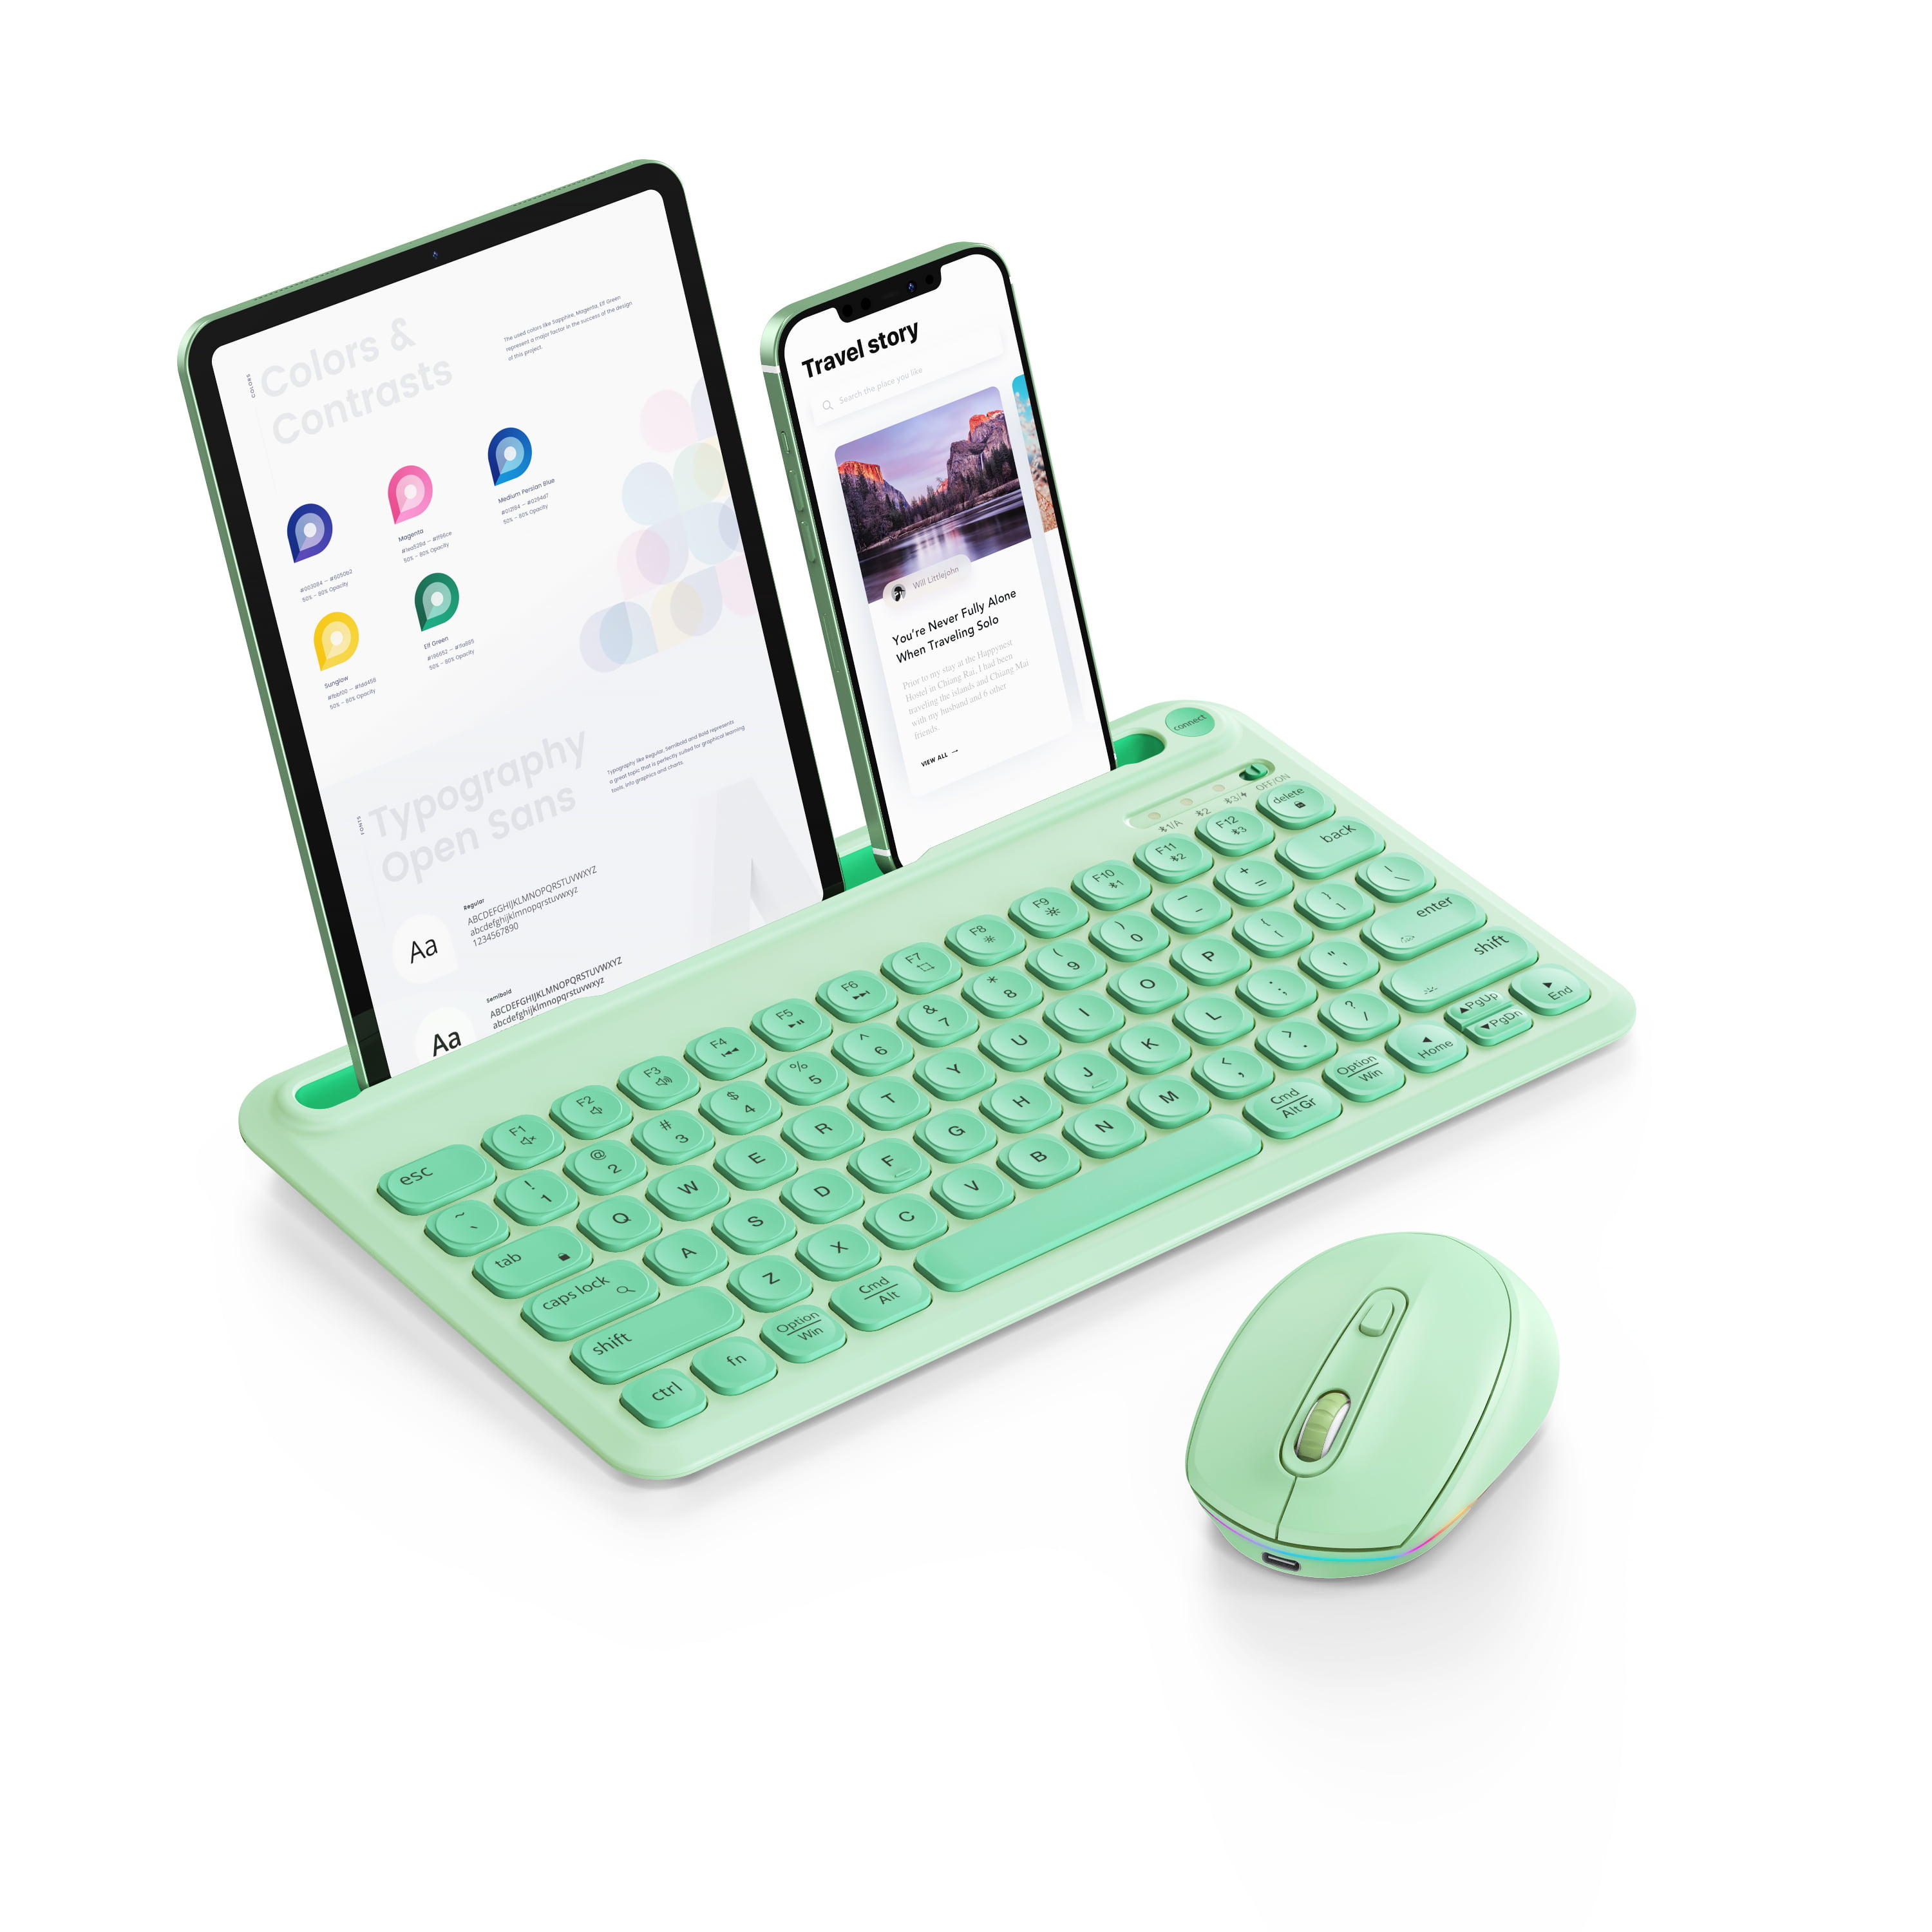 Cellphone iOS Android -B046 Jelly Comb Multi-Device Rechargeable Wireless Bluetooth Keyboard with Built-in Stand Slot Compatible with iPad Tablet Bluetooth Keyboard Mint Green 